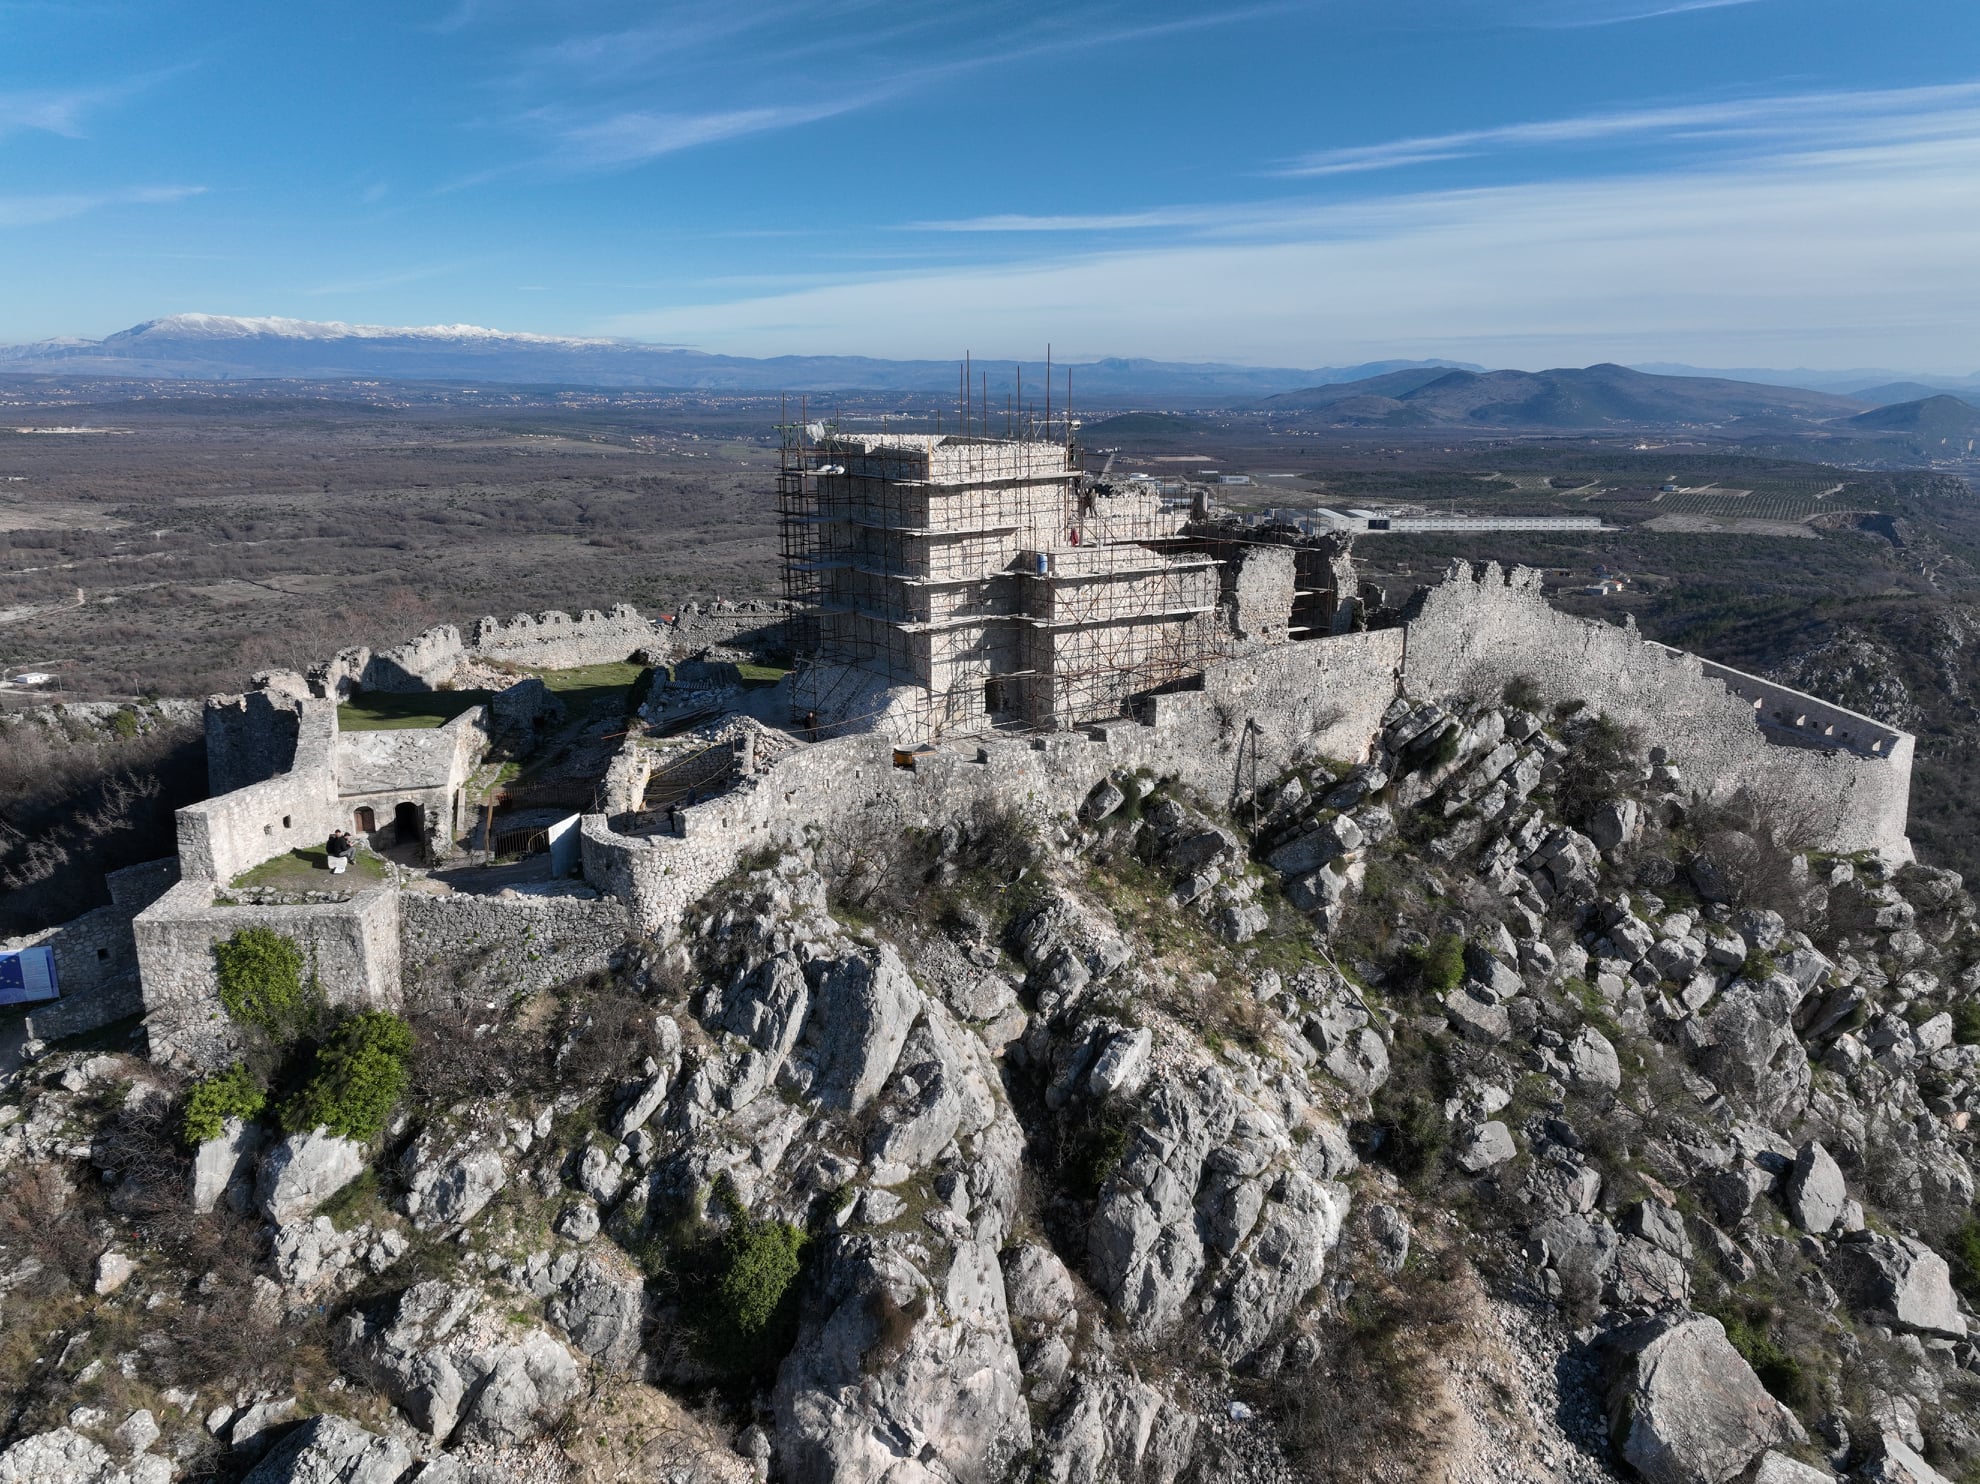 Heritage revived: One of Croatia’s most important ancient Christian sites gets rest area in €2m cross-border project  